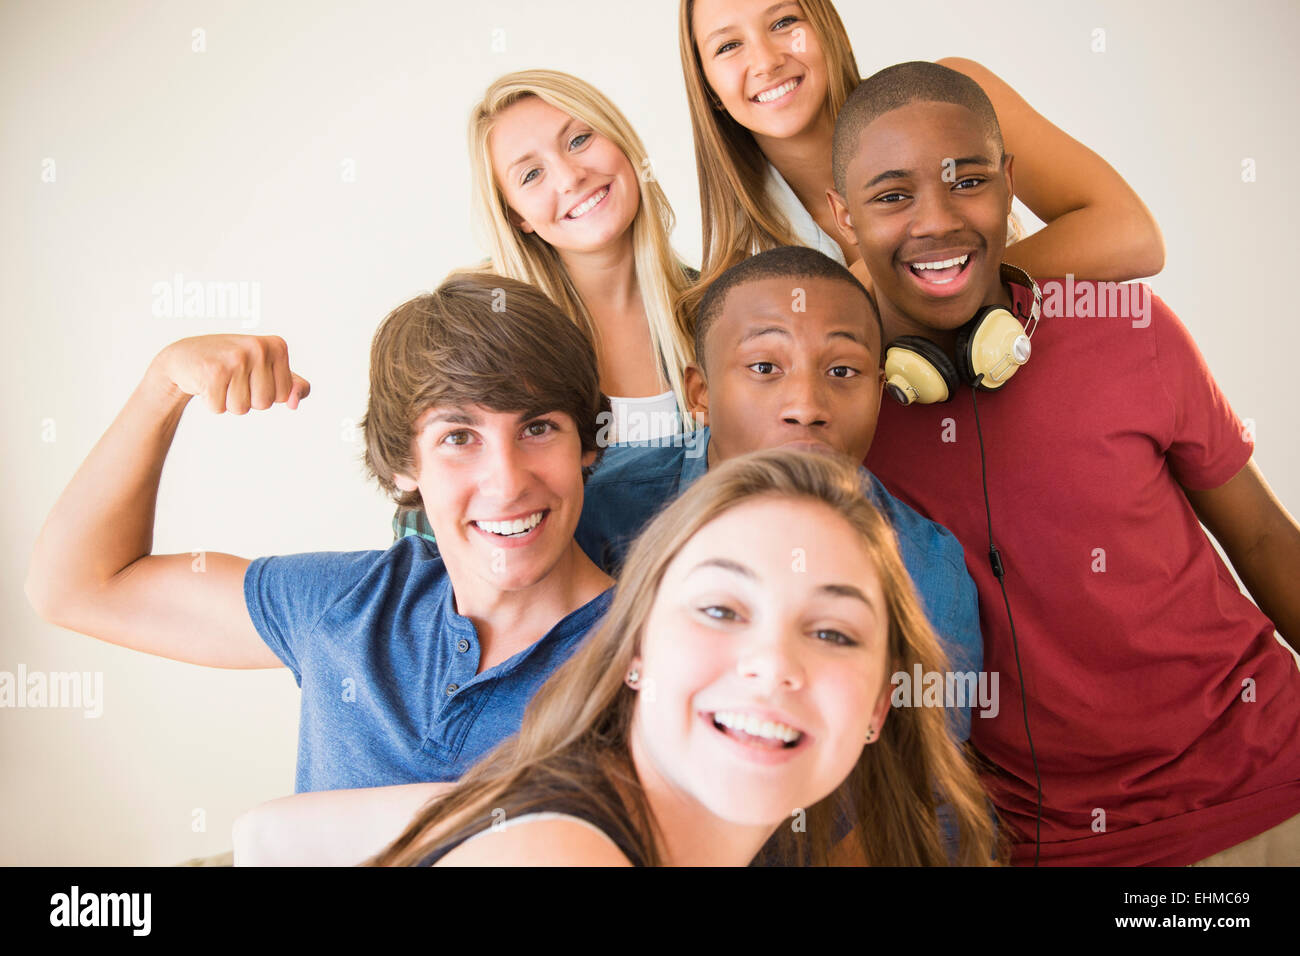 Teenagers smiling together Stock Photo